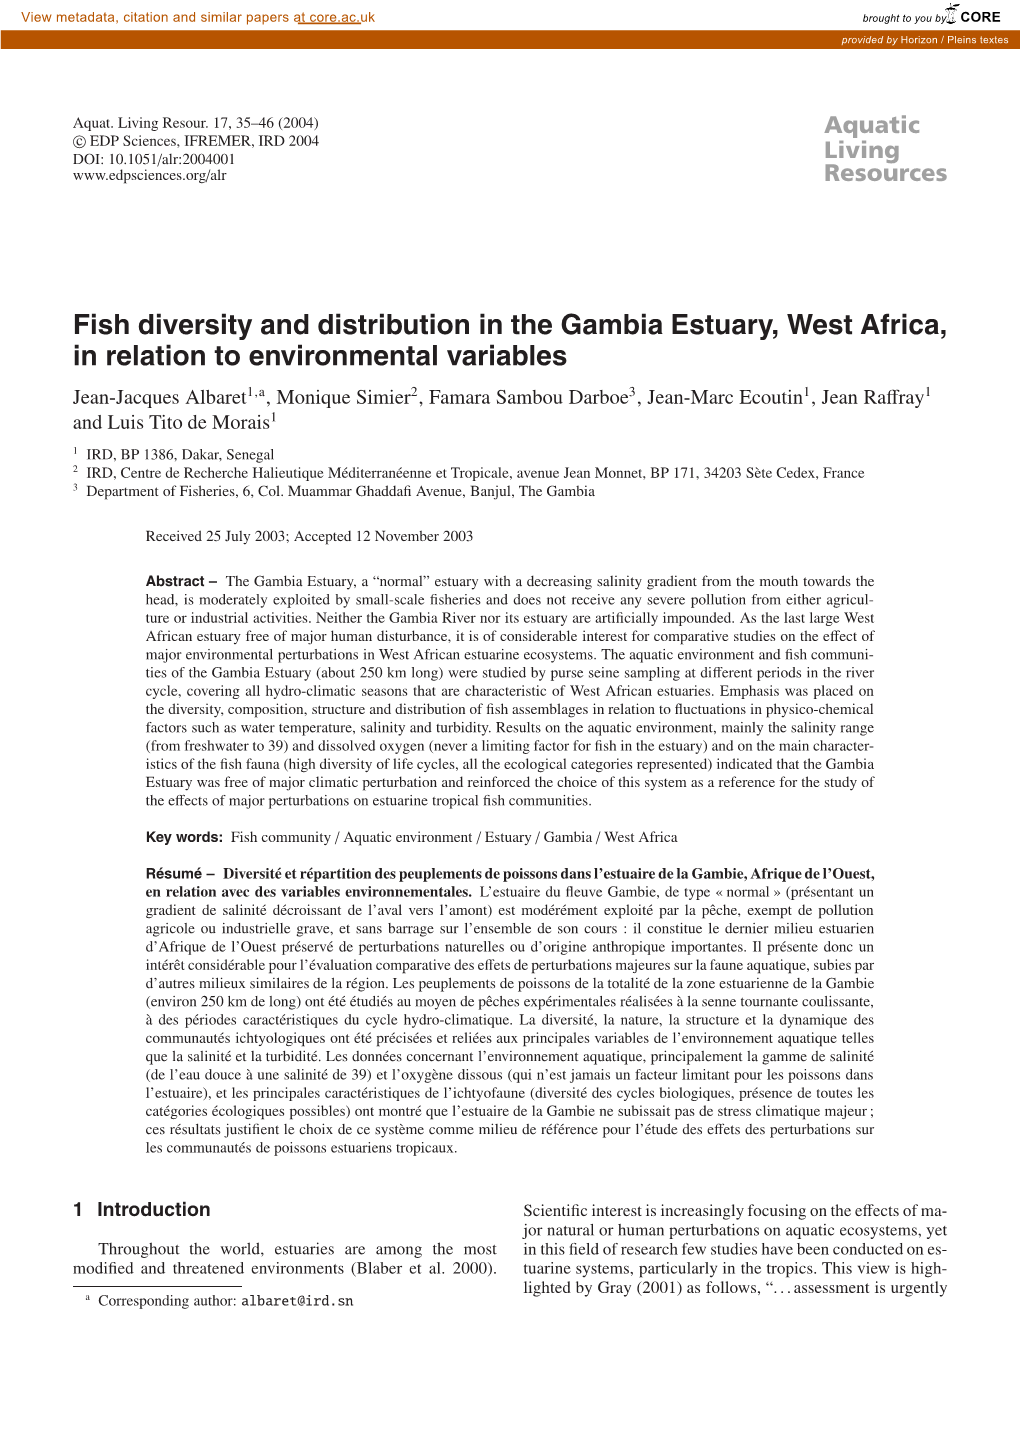 Fish Diversity and Distribution in the Gambia Estuary, West Africa, In